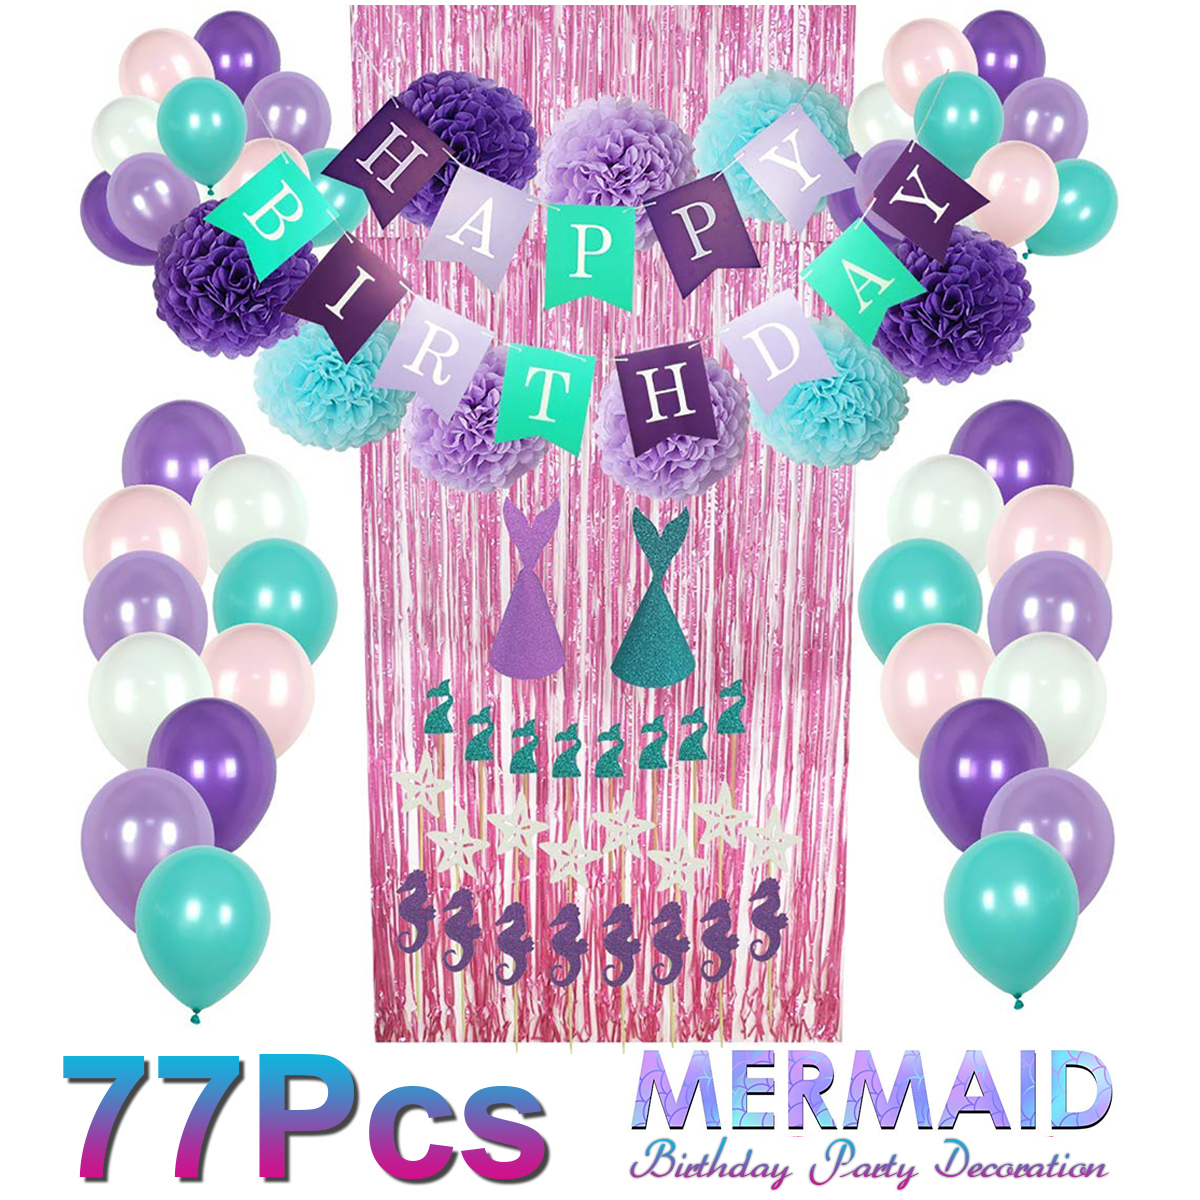 77pcs-Mermaid-Party-Supplies-Party-Decorations-for-Girls-Birthday-Party-Baby-Shower-Decoration-1638705-1